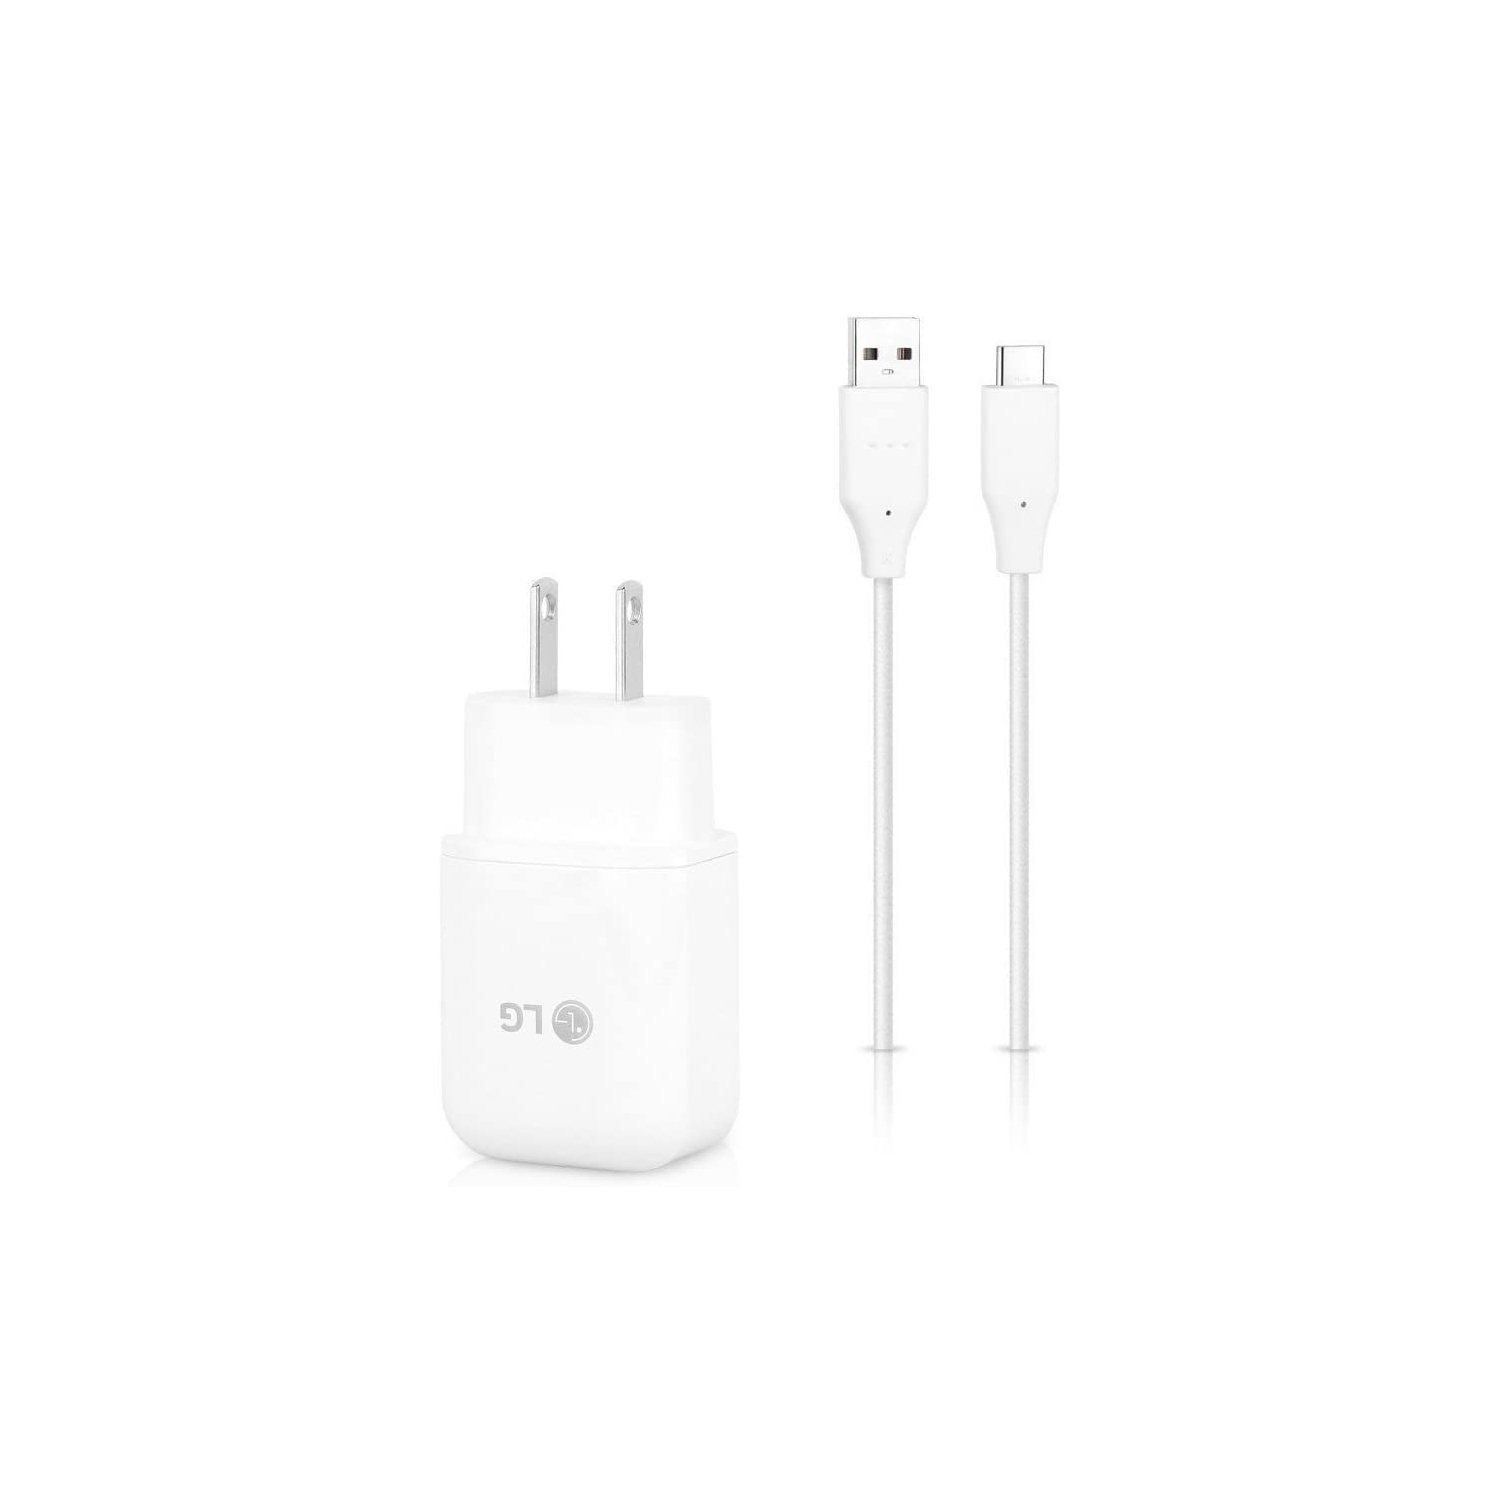 LG Fast Adaptive USB Wall Charger + 3.3Ft Type USB C Cable for LG V20 G4 G5 G6 G7, Google Nexus 6P, Oneplus 2 3 4 5